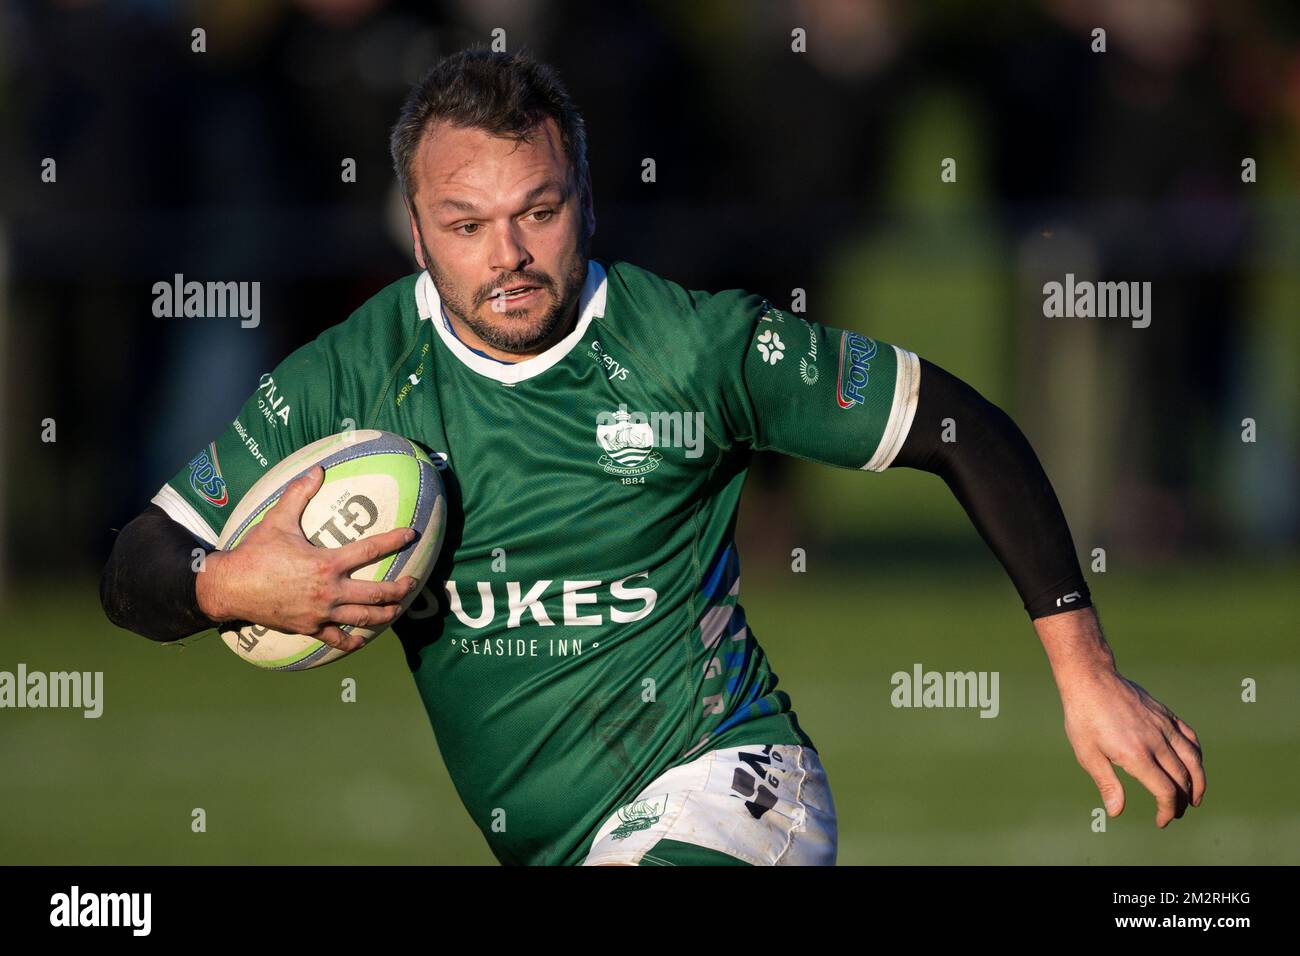 Rugby player in action Stock Photo